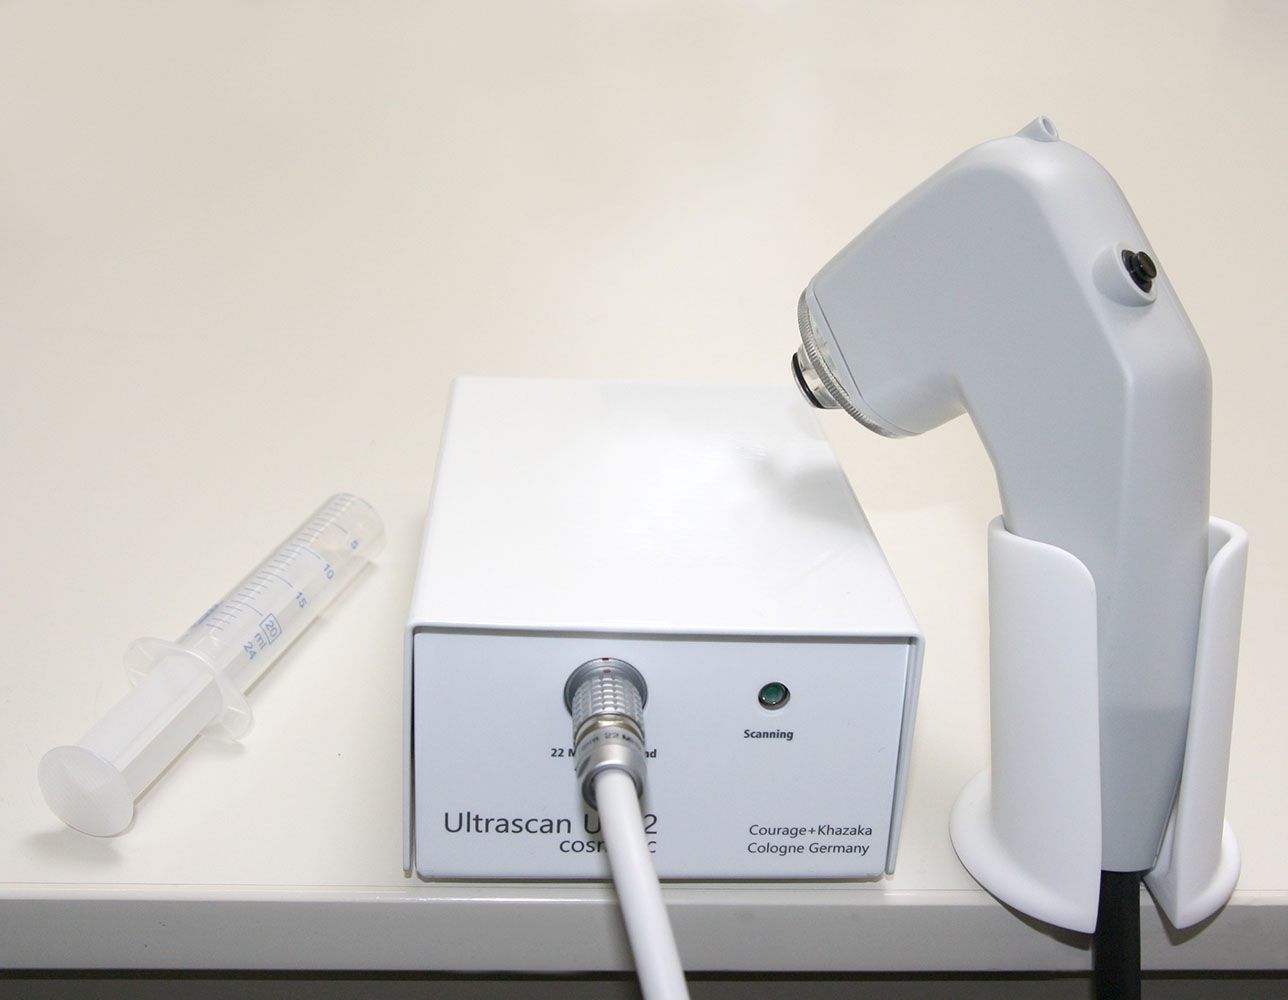 new feature - osteoporosis risk assessment with the Ultrascan UC 22